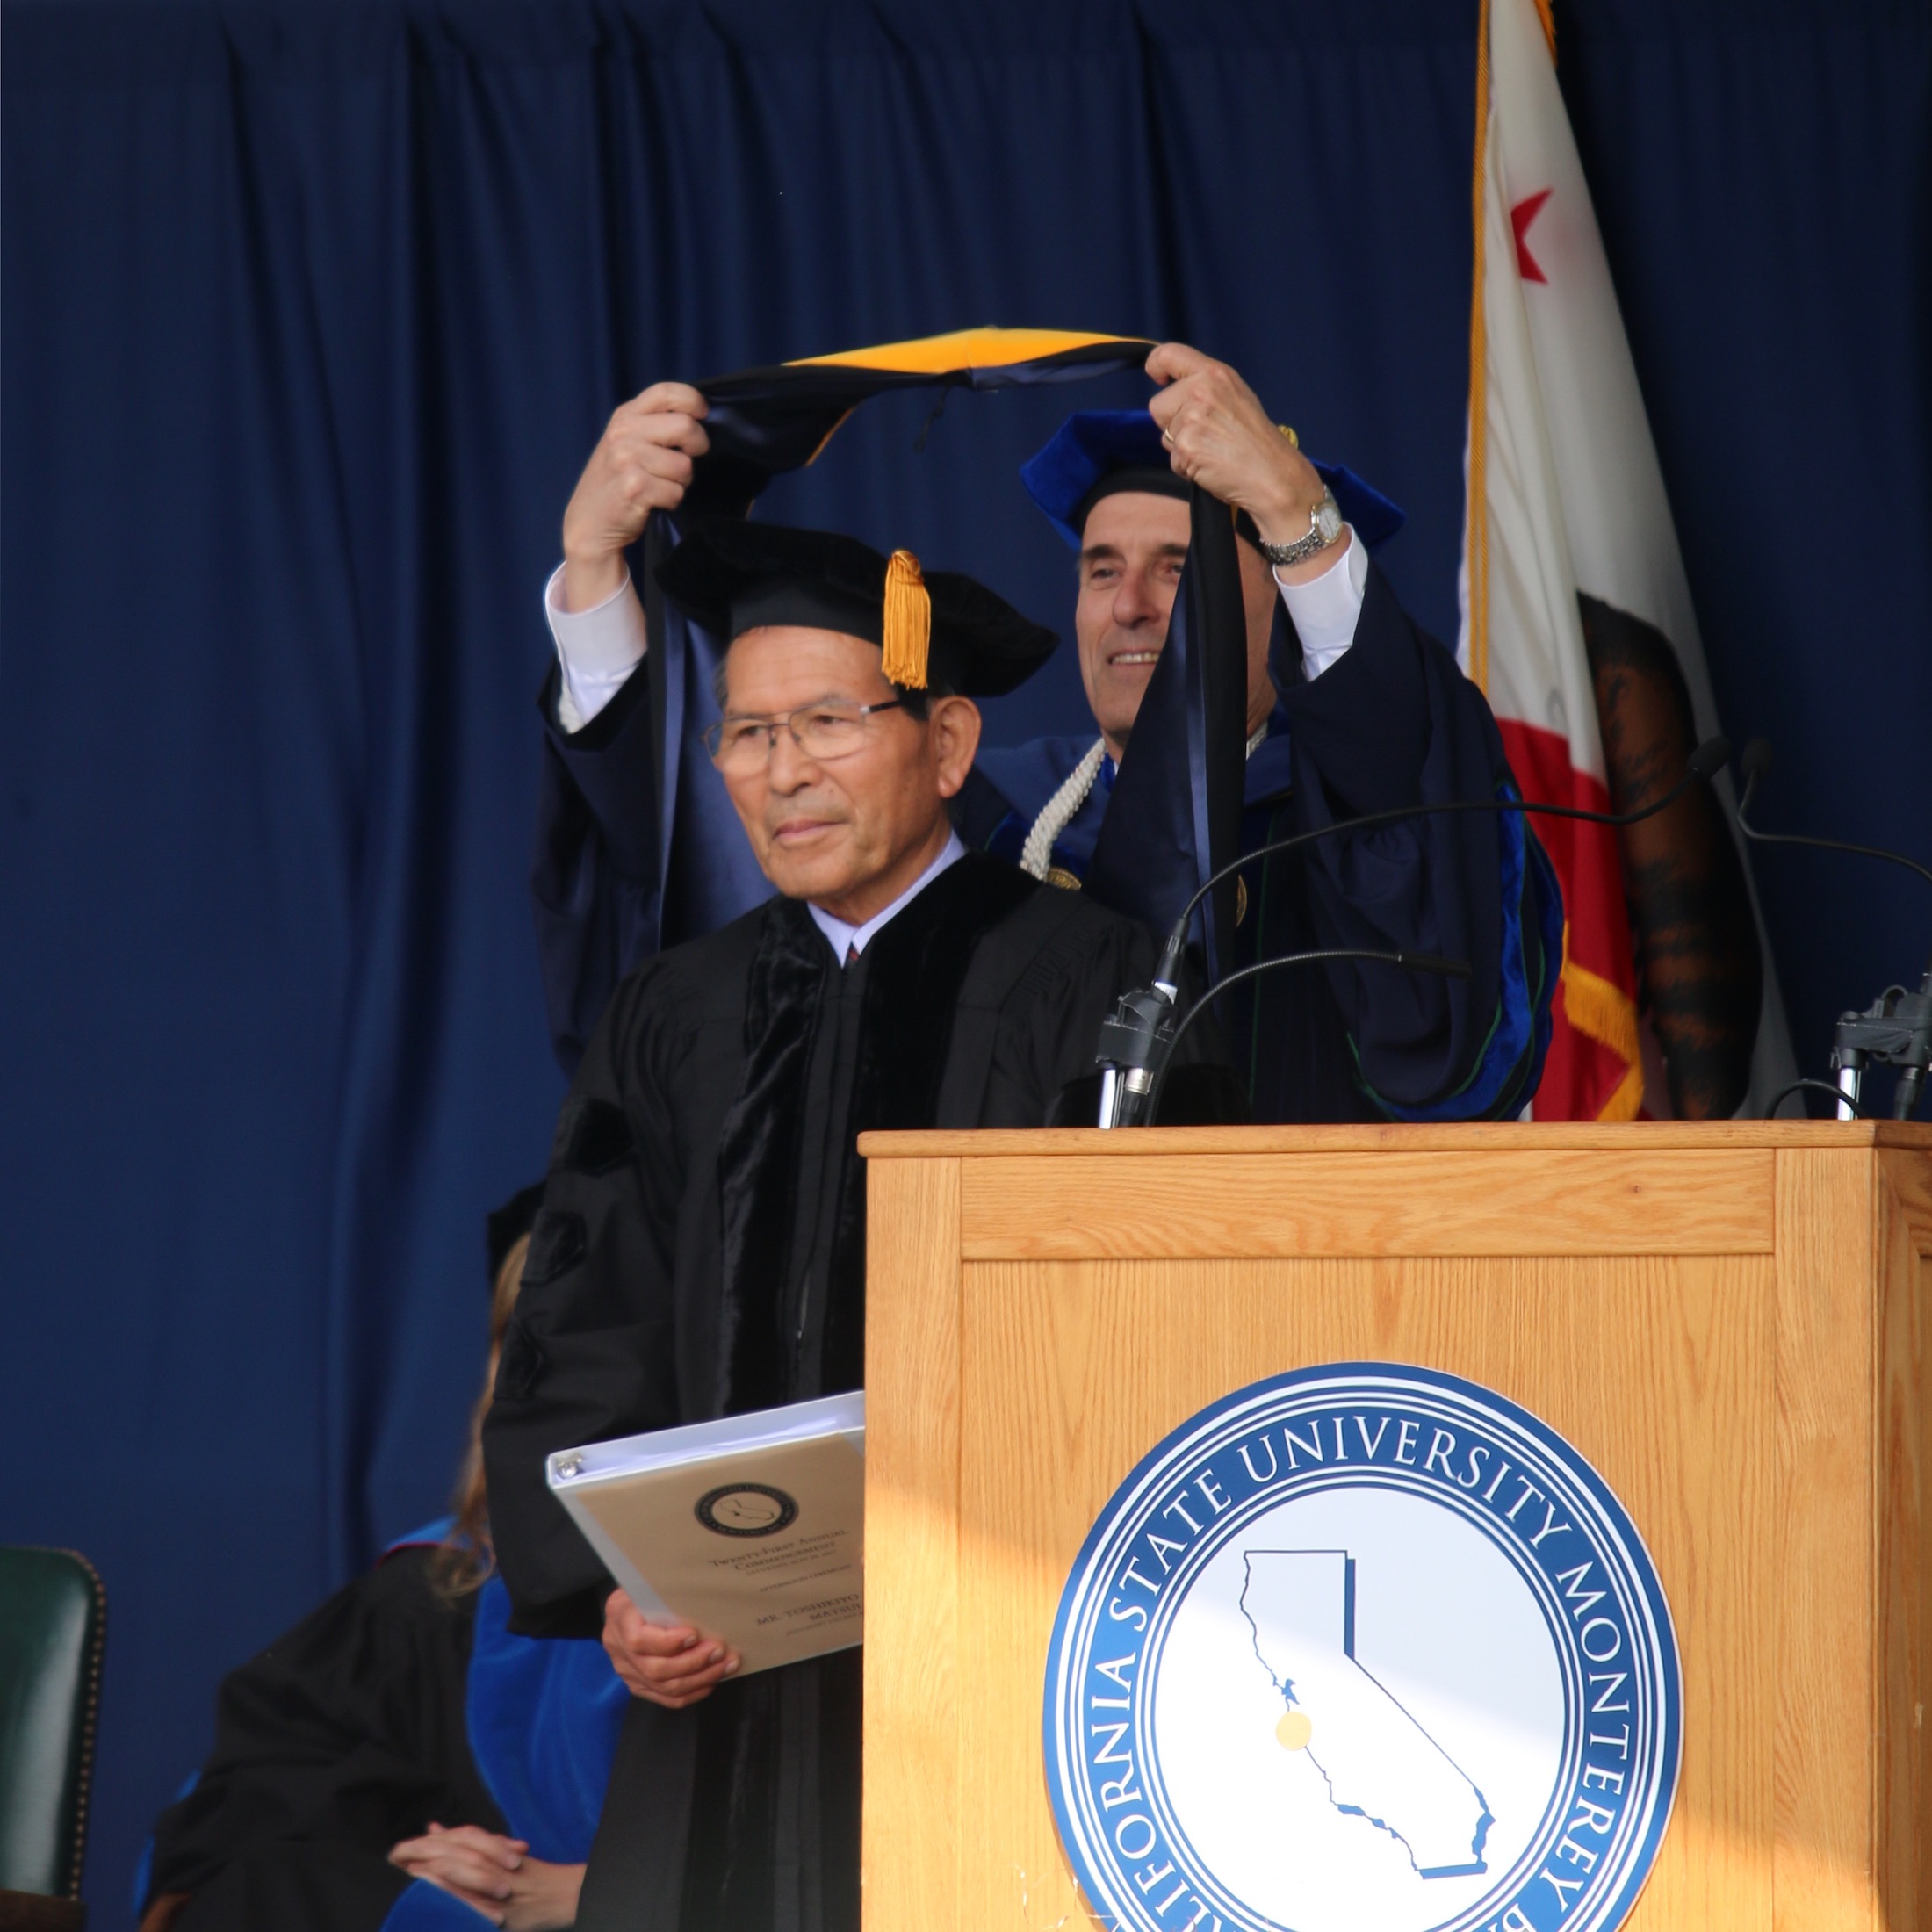 Andy Matsui is awarded an honorary Doctorate of Science for his dedication to furthering public education.